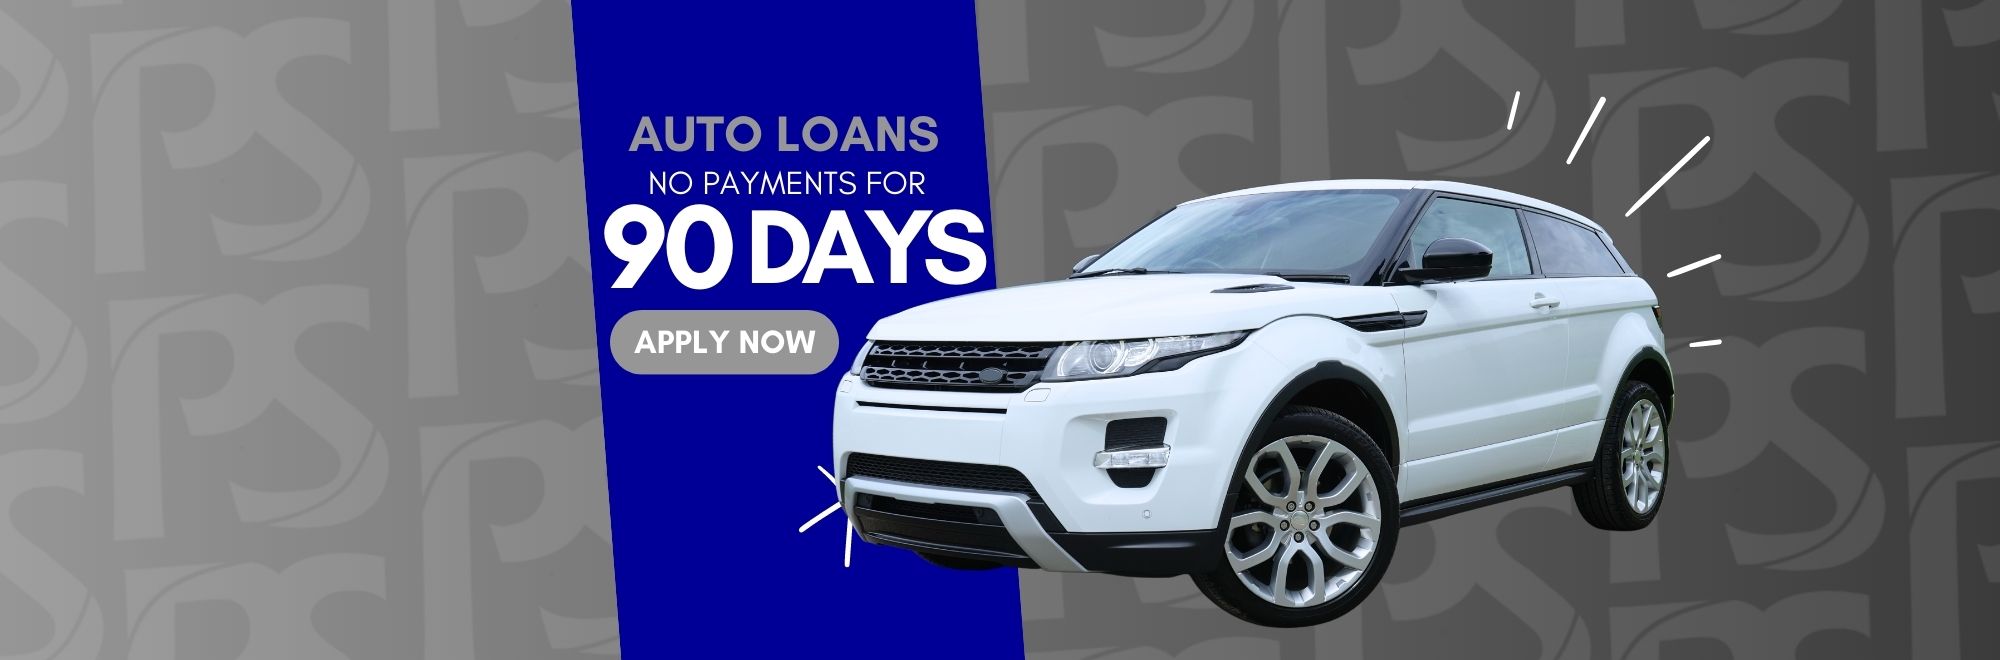 Auto Loans No Payments for 90 Days. Click to Apply Now